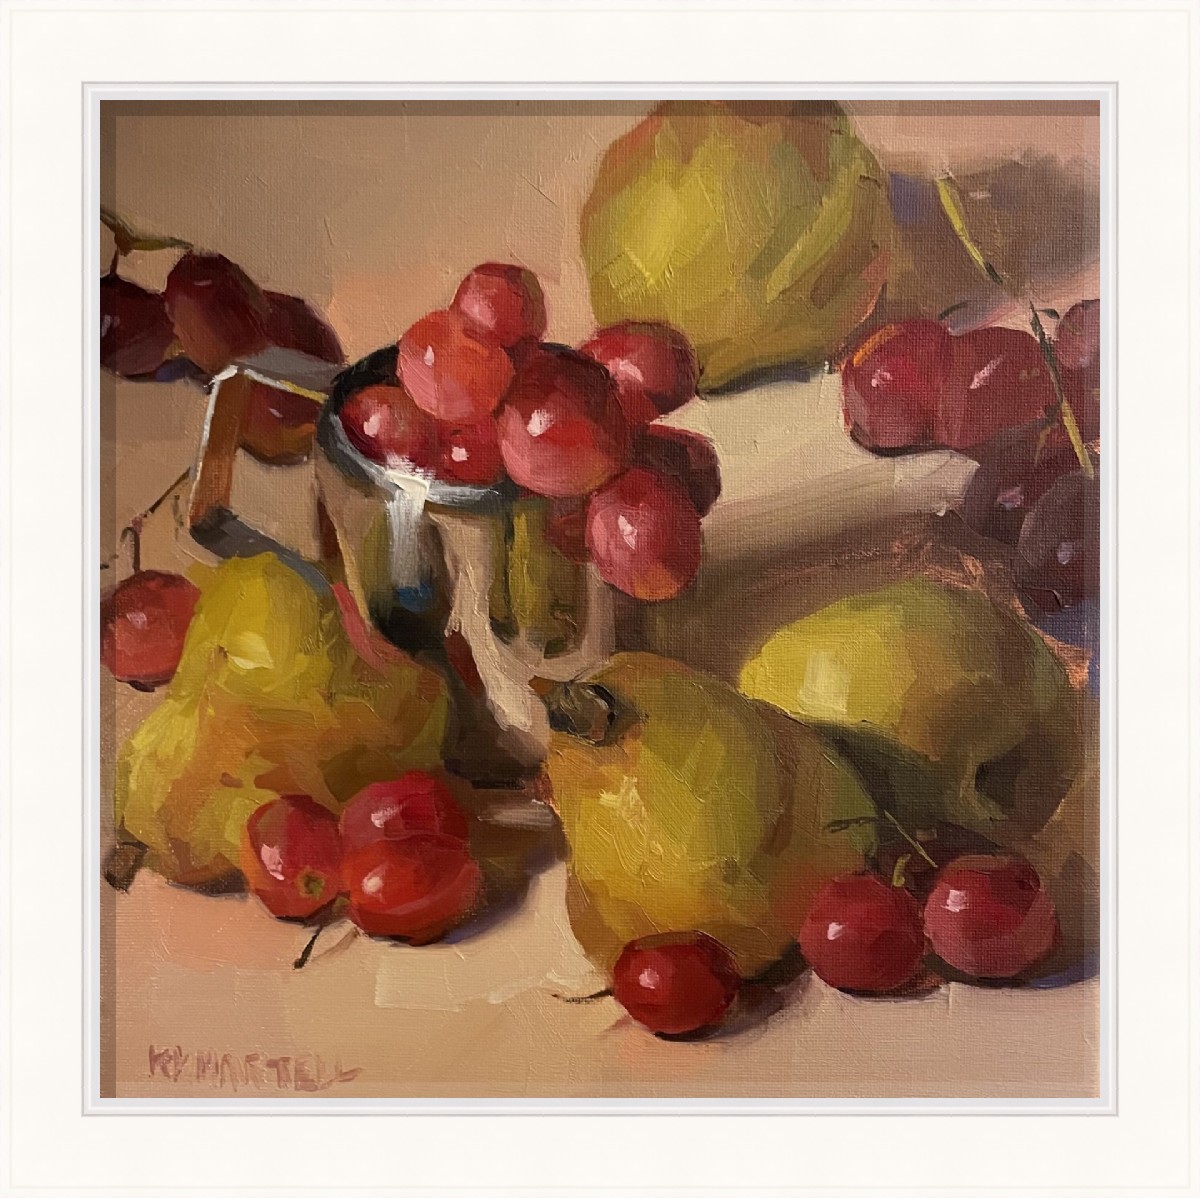 Pears & Pitcher by Kayla Martell